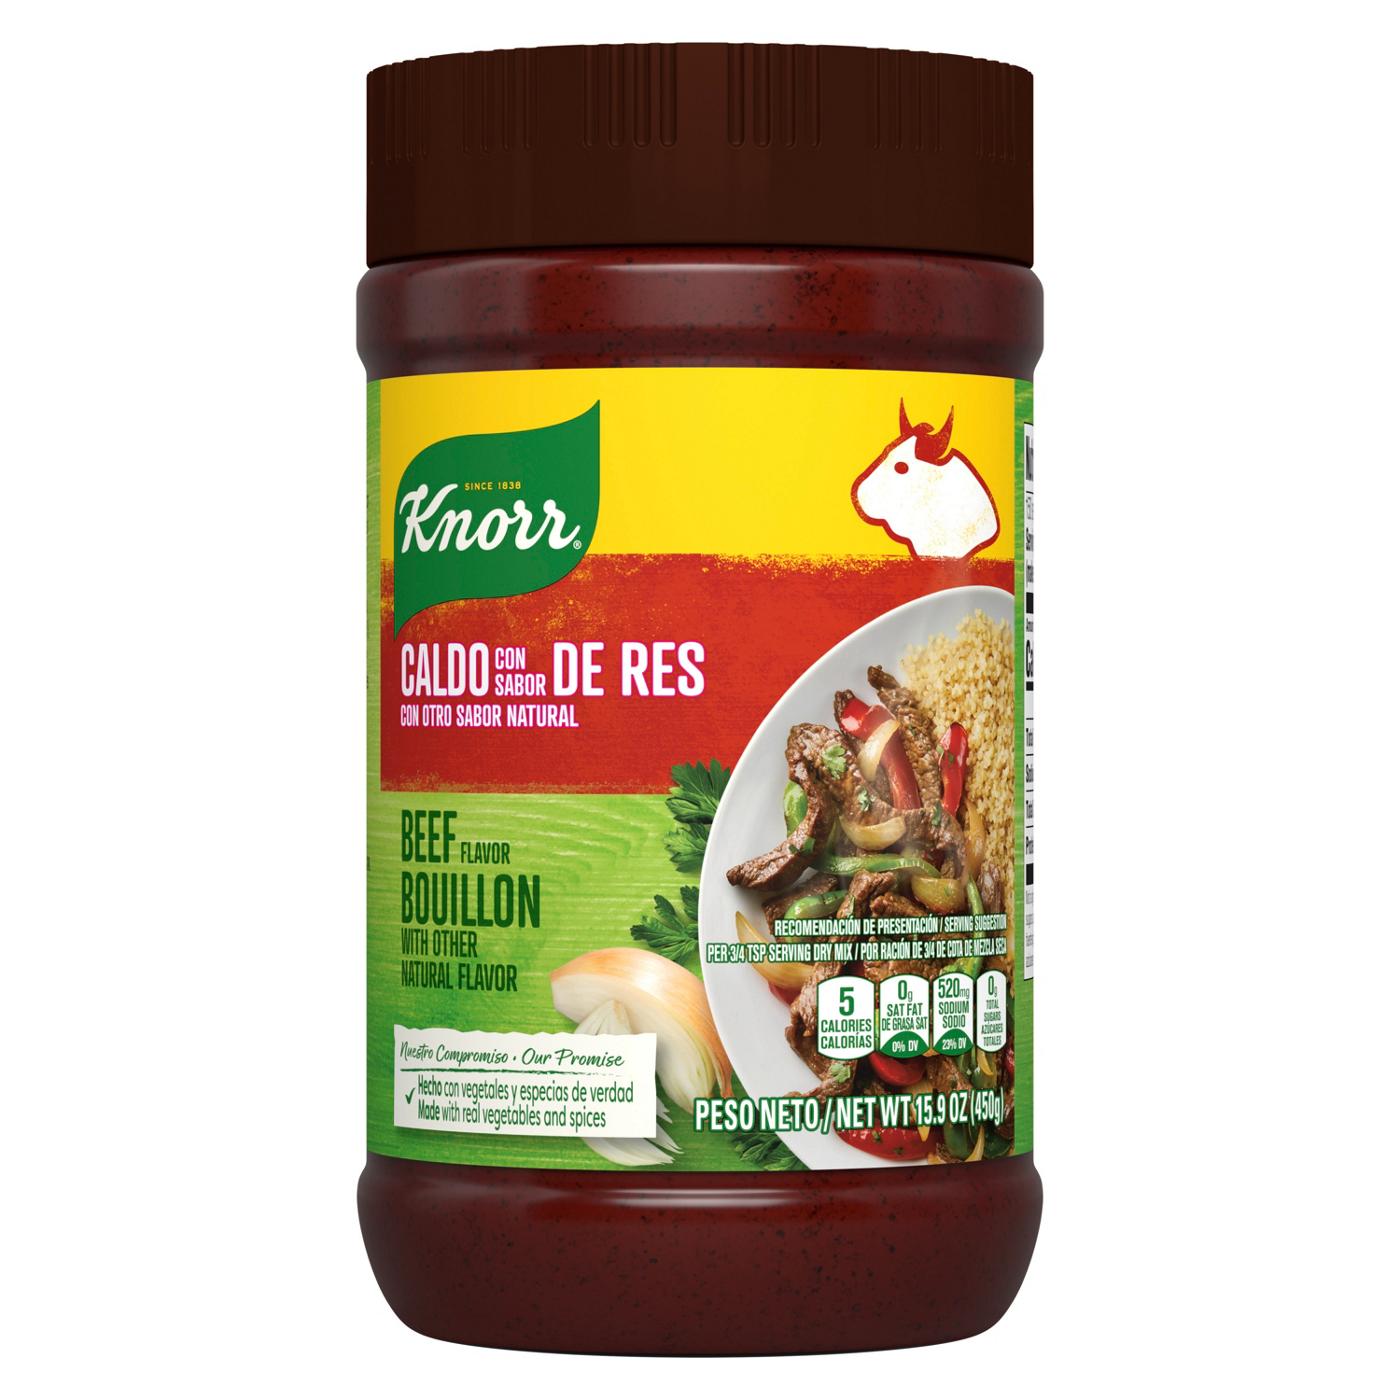 Knorr Granulated Bouillon Beef; image 1 of 6